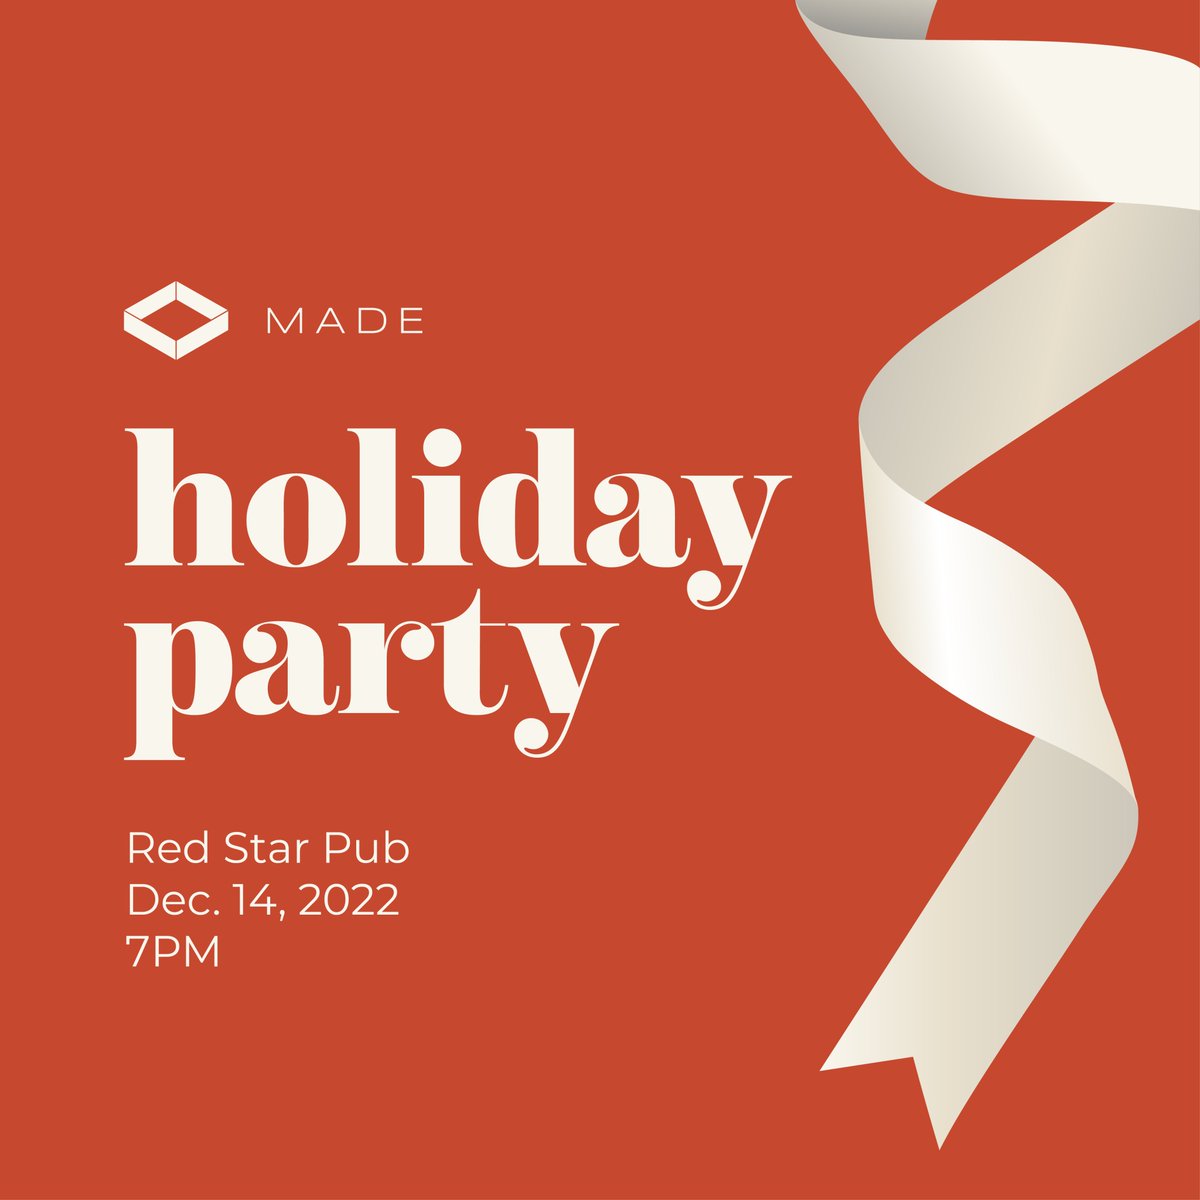 Join us on December 14 to cap off a great year of MADE events over food and drinks! More info: eventbrite.ca/e/made-holiday…